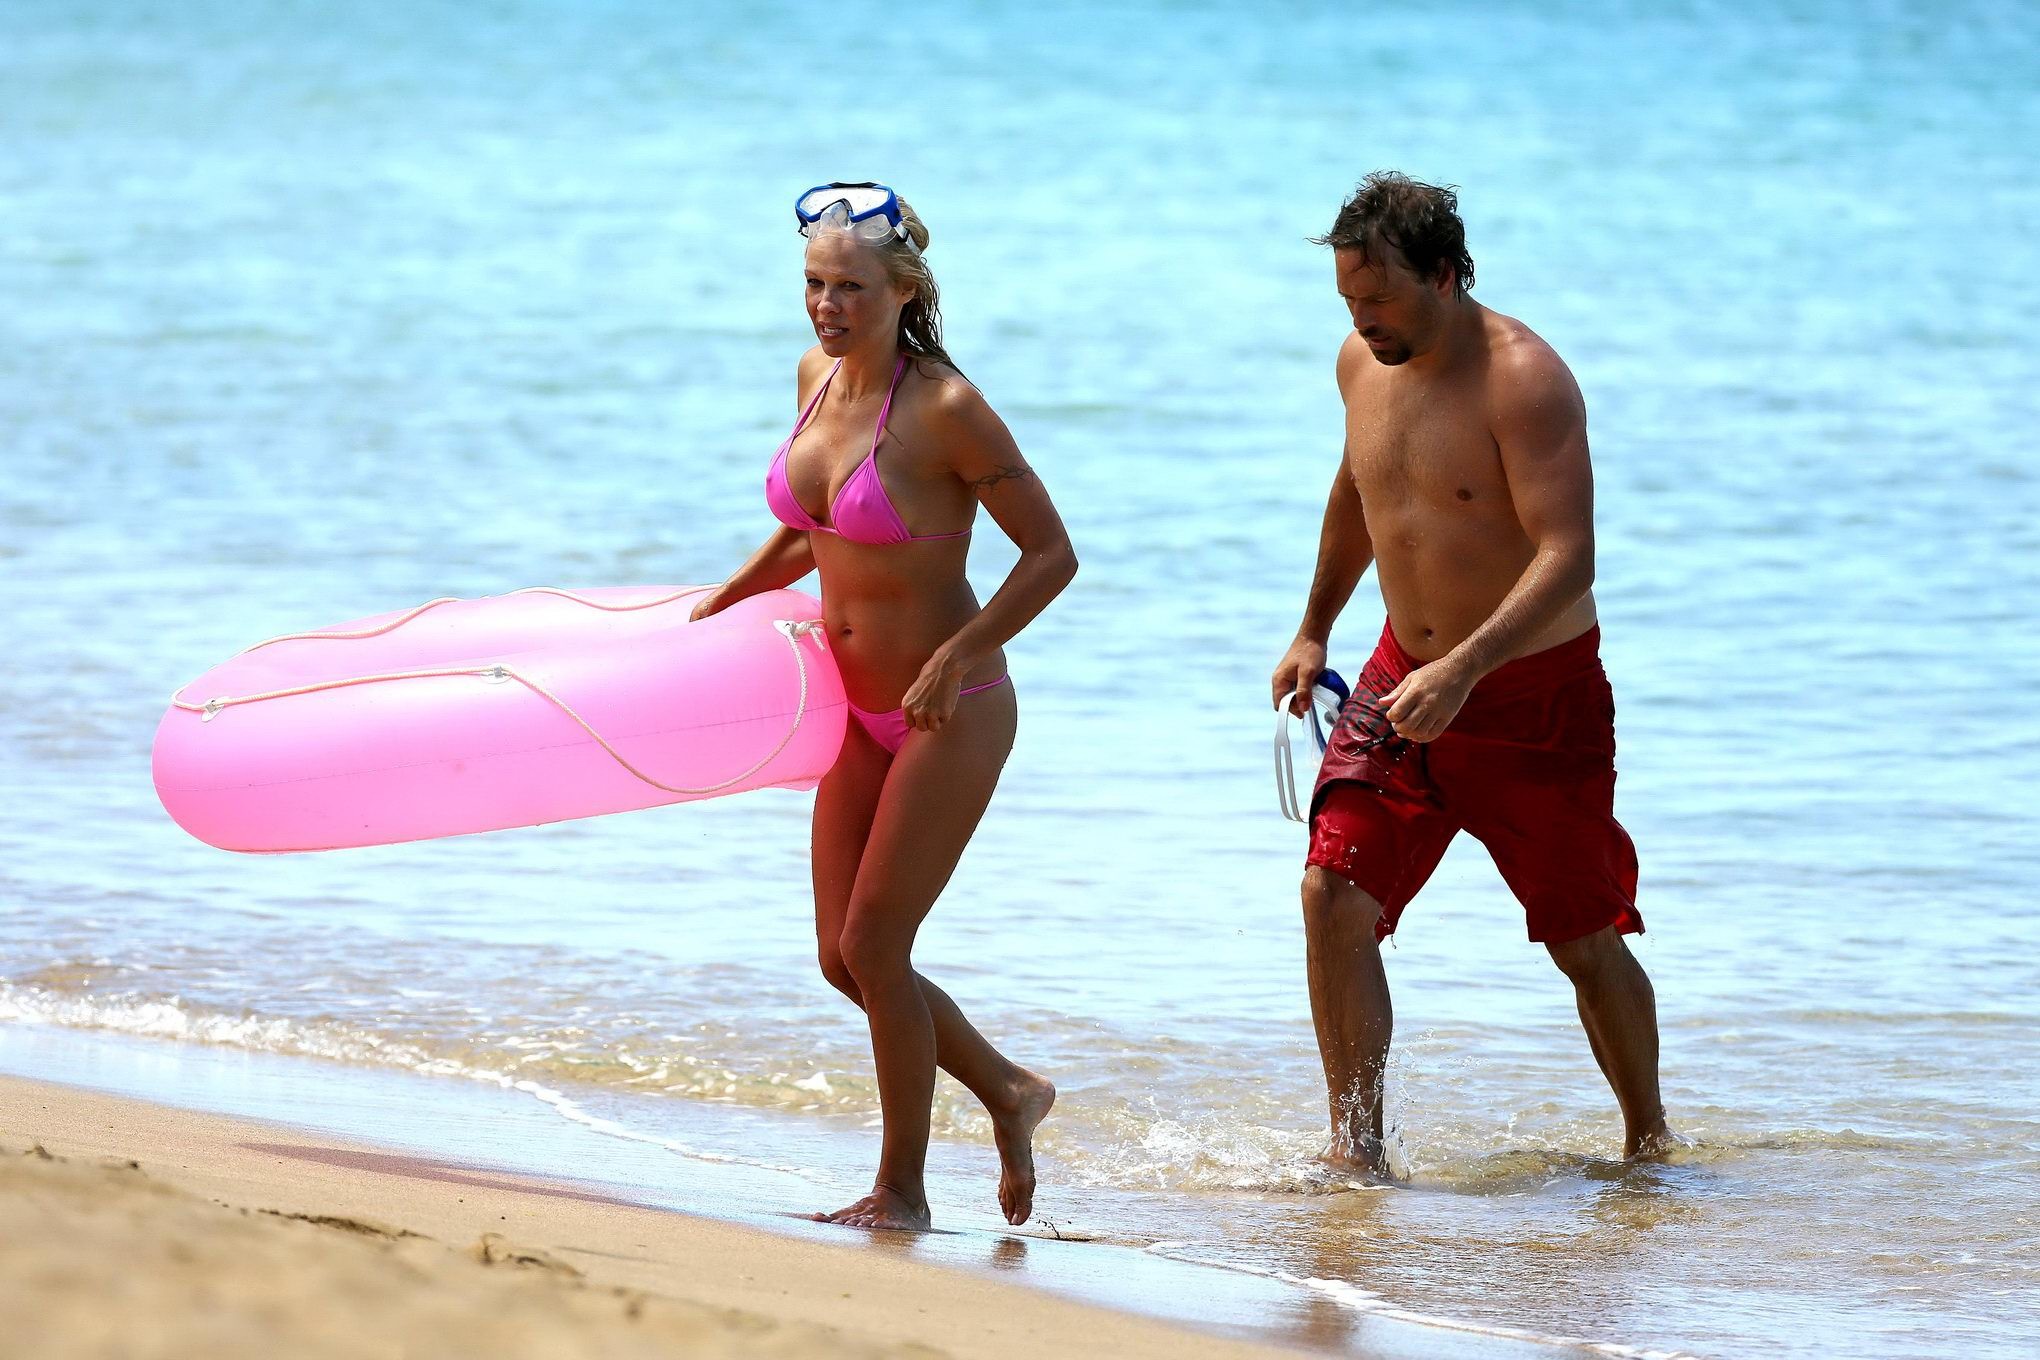 Busty Pamela Anderson showing pokies in a wet pink bikini while snorkeling on a  #75221556